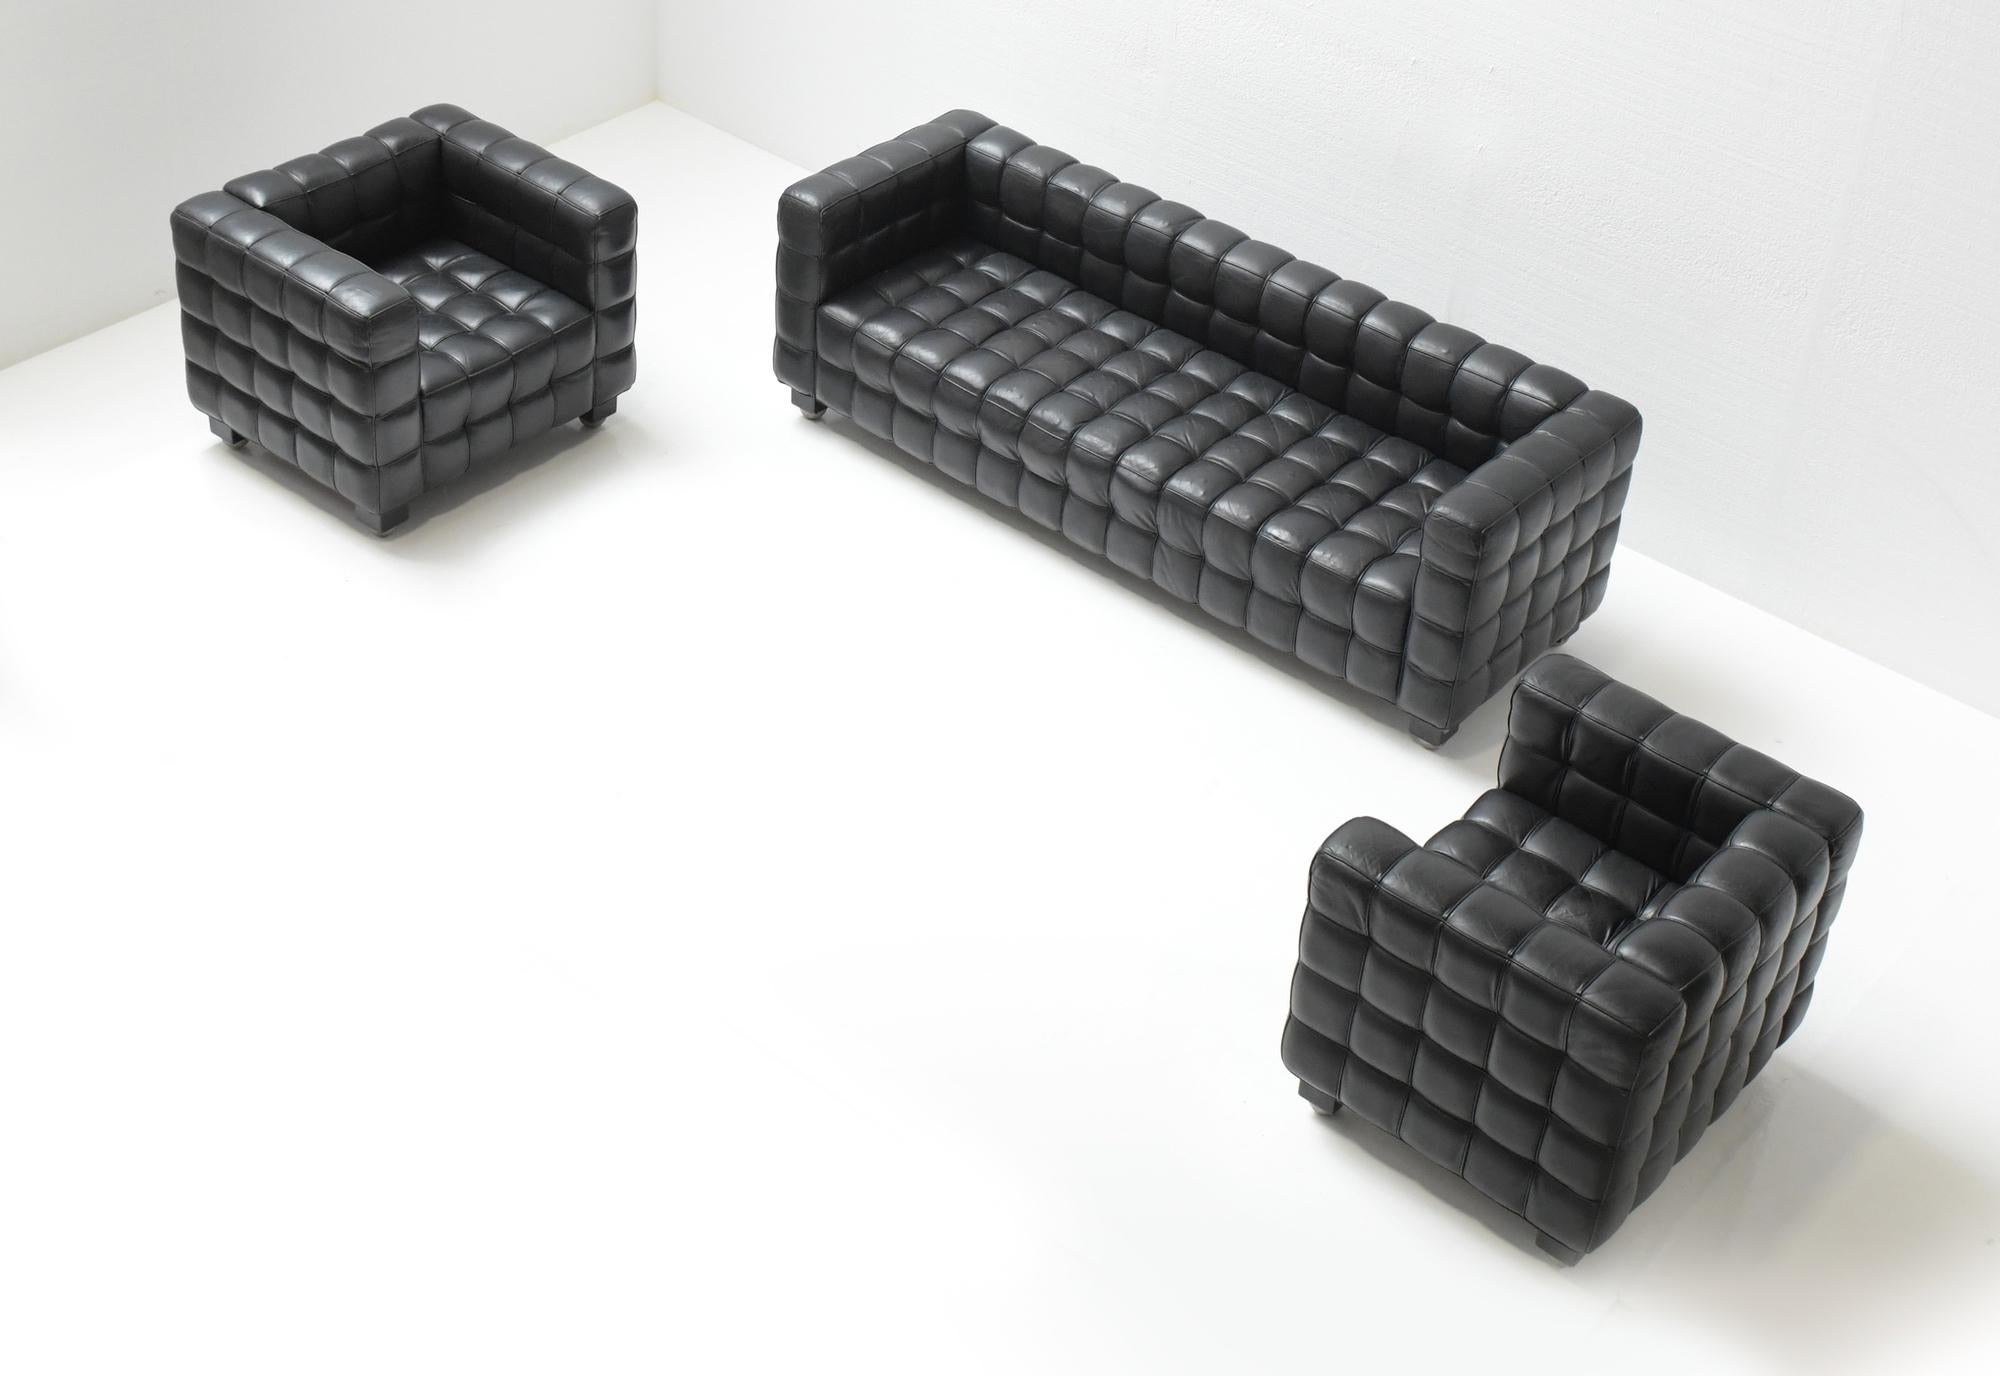 Stunning & rare matching Kubus set. Still 100% original and with manufacturer plaque on the bottom of each chair.
Designed by Josef Hoffmann & produced by Witmann.
A Classic example of Hoffmann’s strict geometrical lines.

The Kubus sofa was